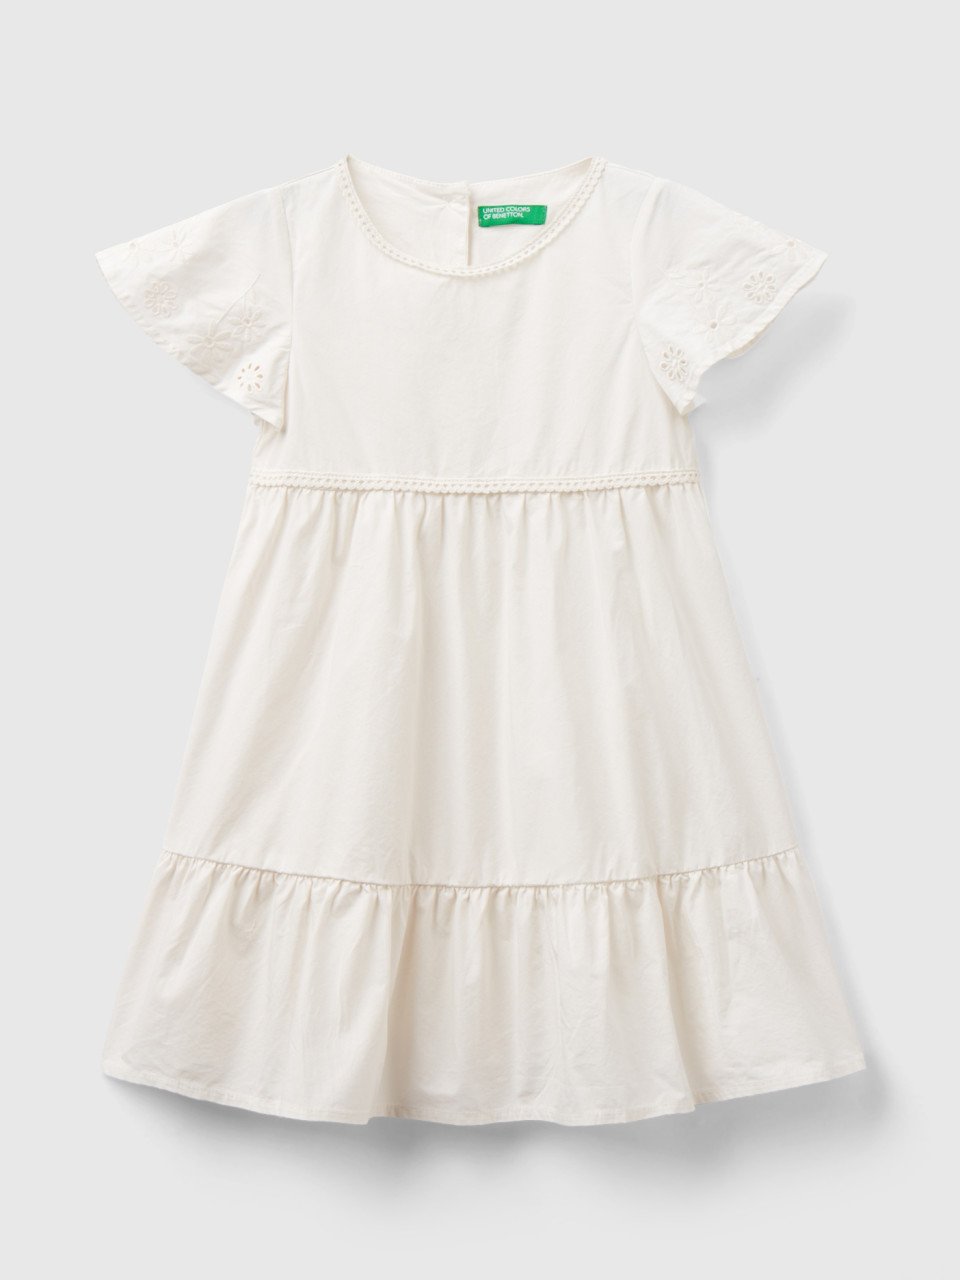 Benetton, Dress With Embroidery And Frill, Creamy White, Kids